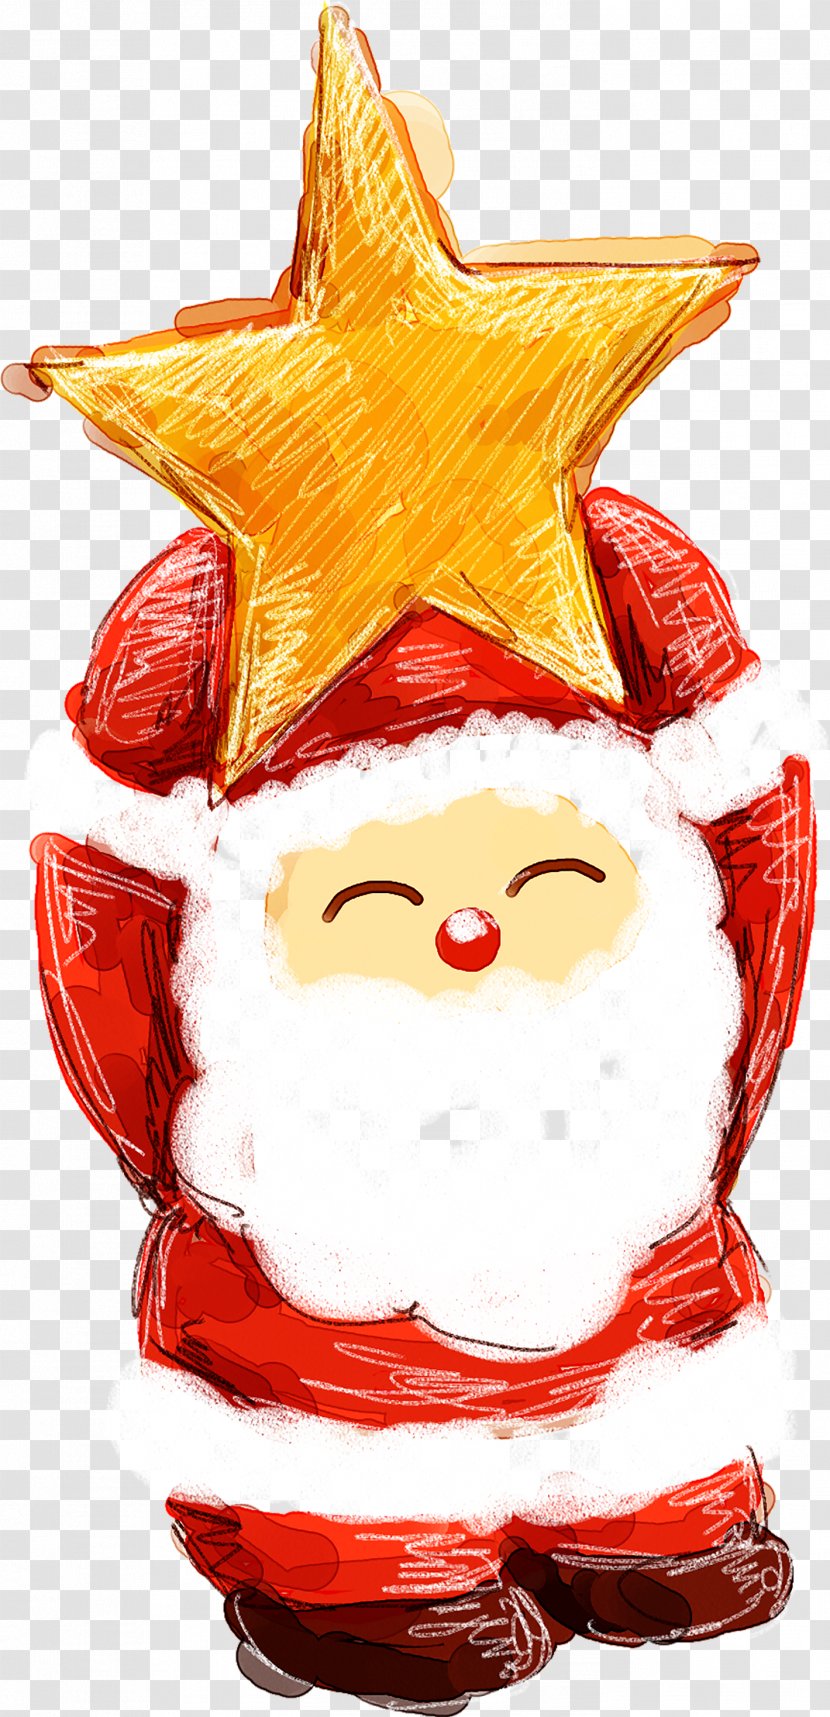 Santa Claus Christmas Card Reindeer Gift - Hand-painted Transparent PNG